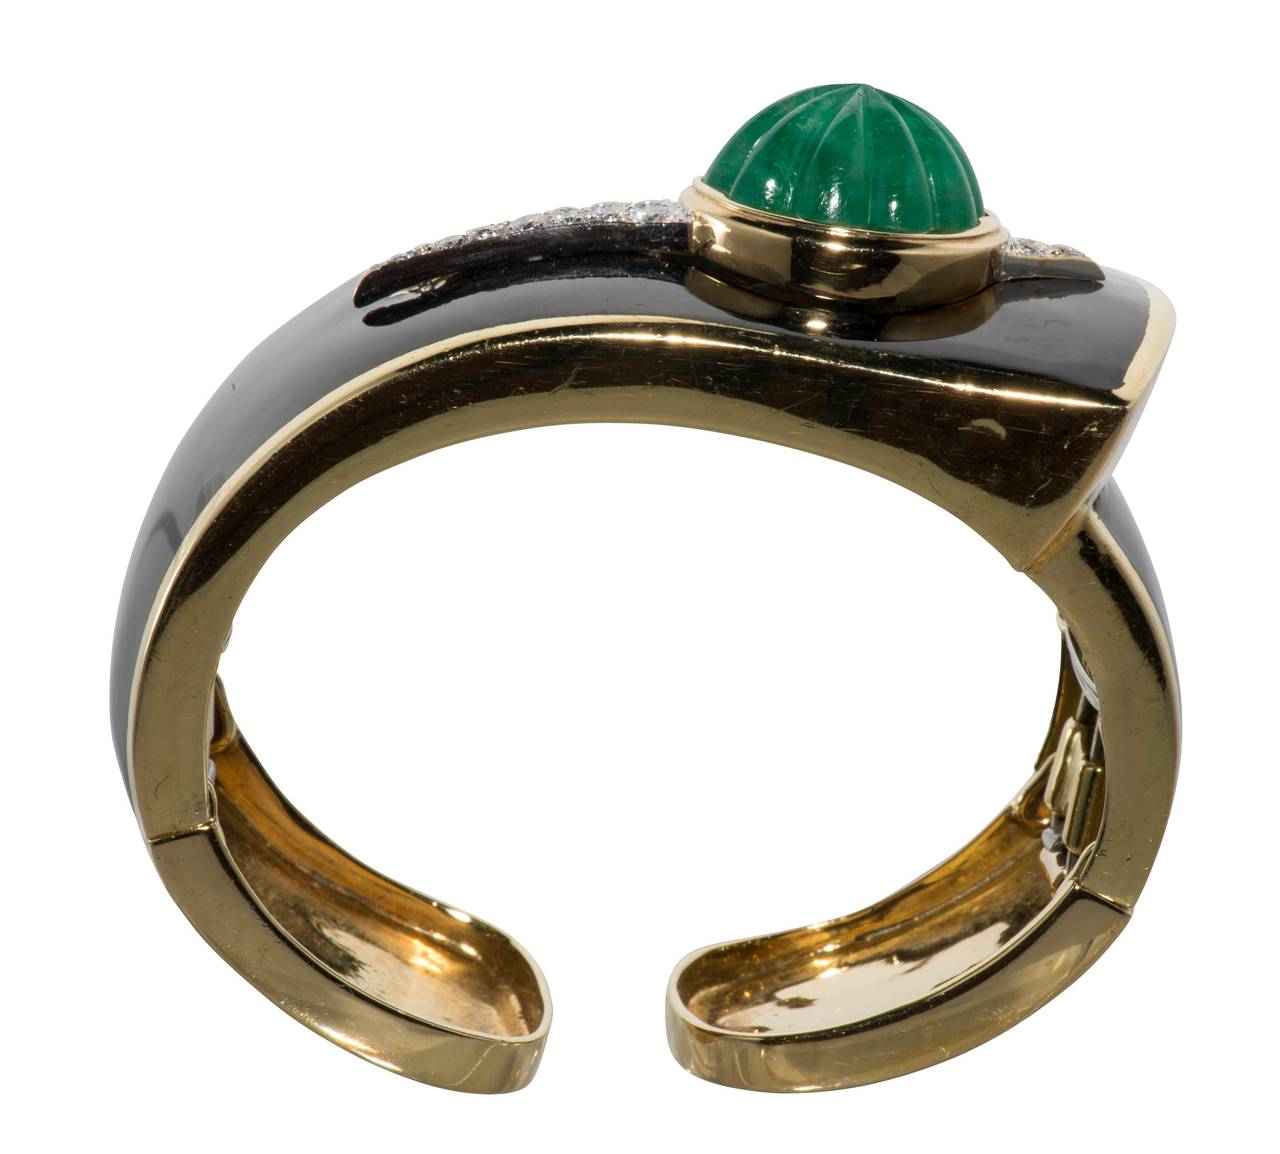 Classic black enamel hinged cuff with a melon carved emerald weighing approximately 10ct.  It is set in yellow gold with diamonds weighing approximately 1ct. set in platinum.